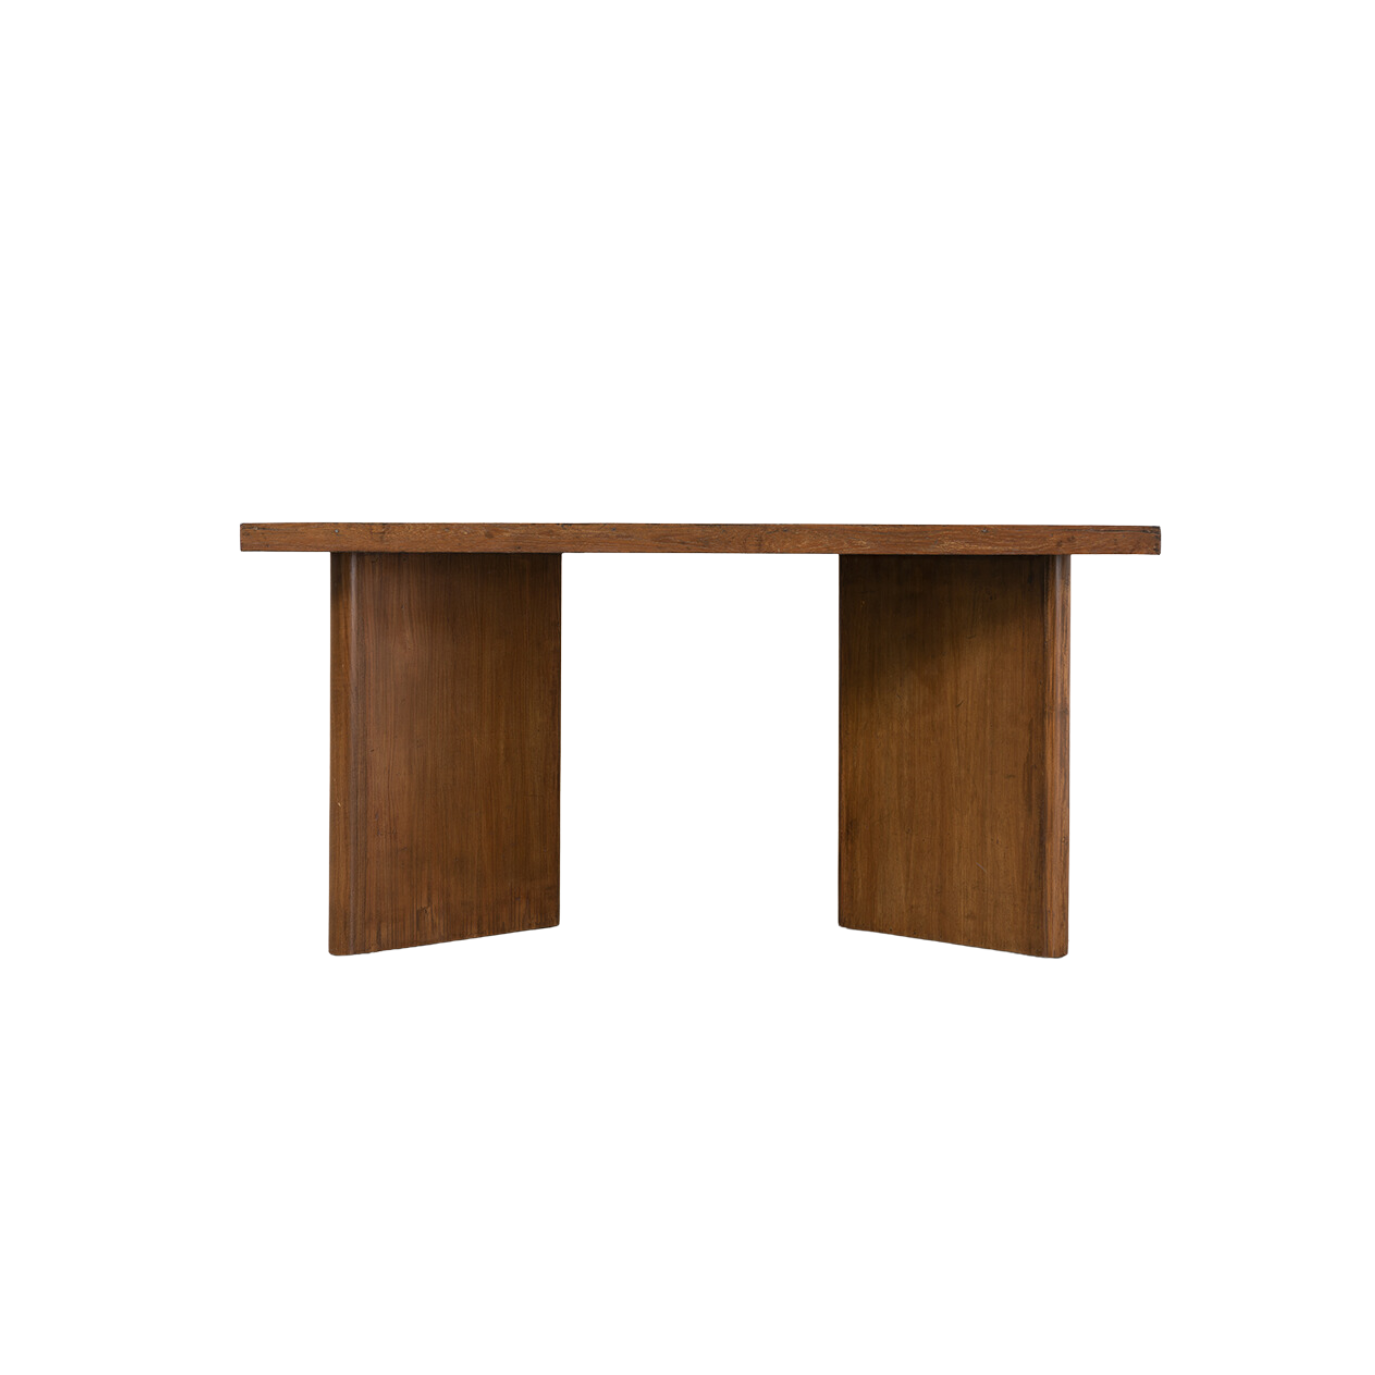 Pierre Jeanneret, Angle Leg Dining Table